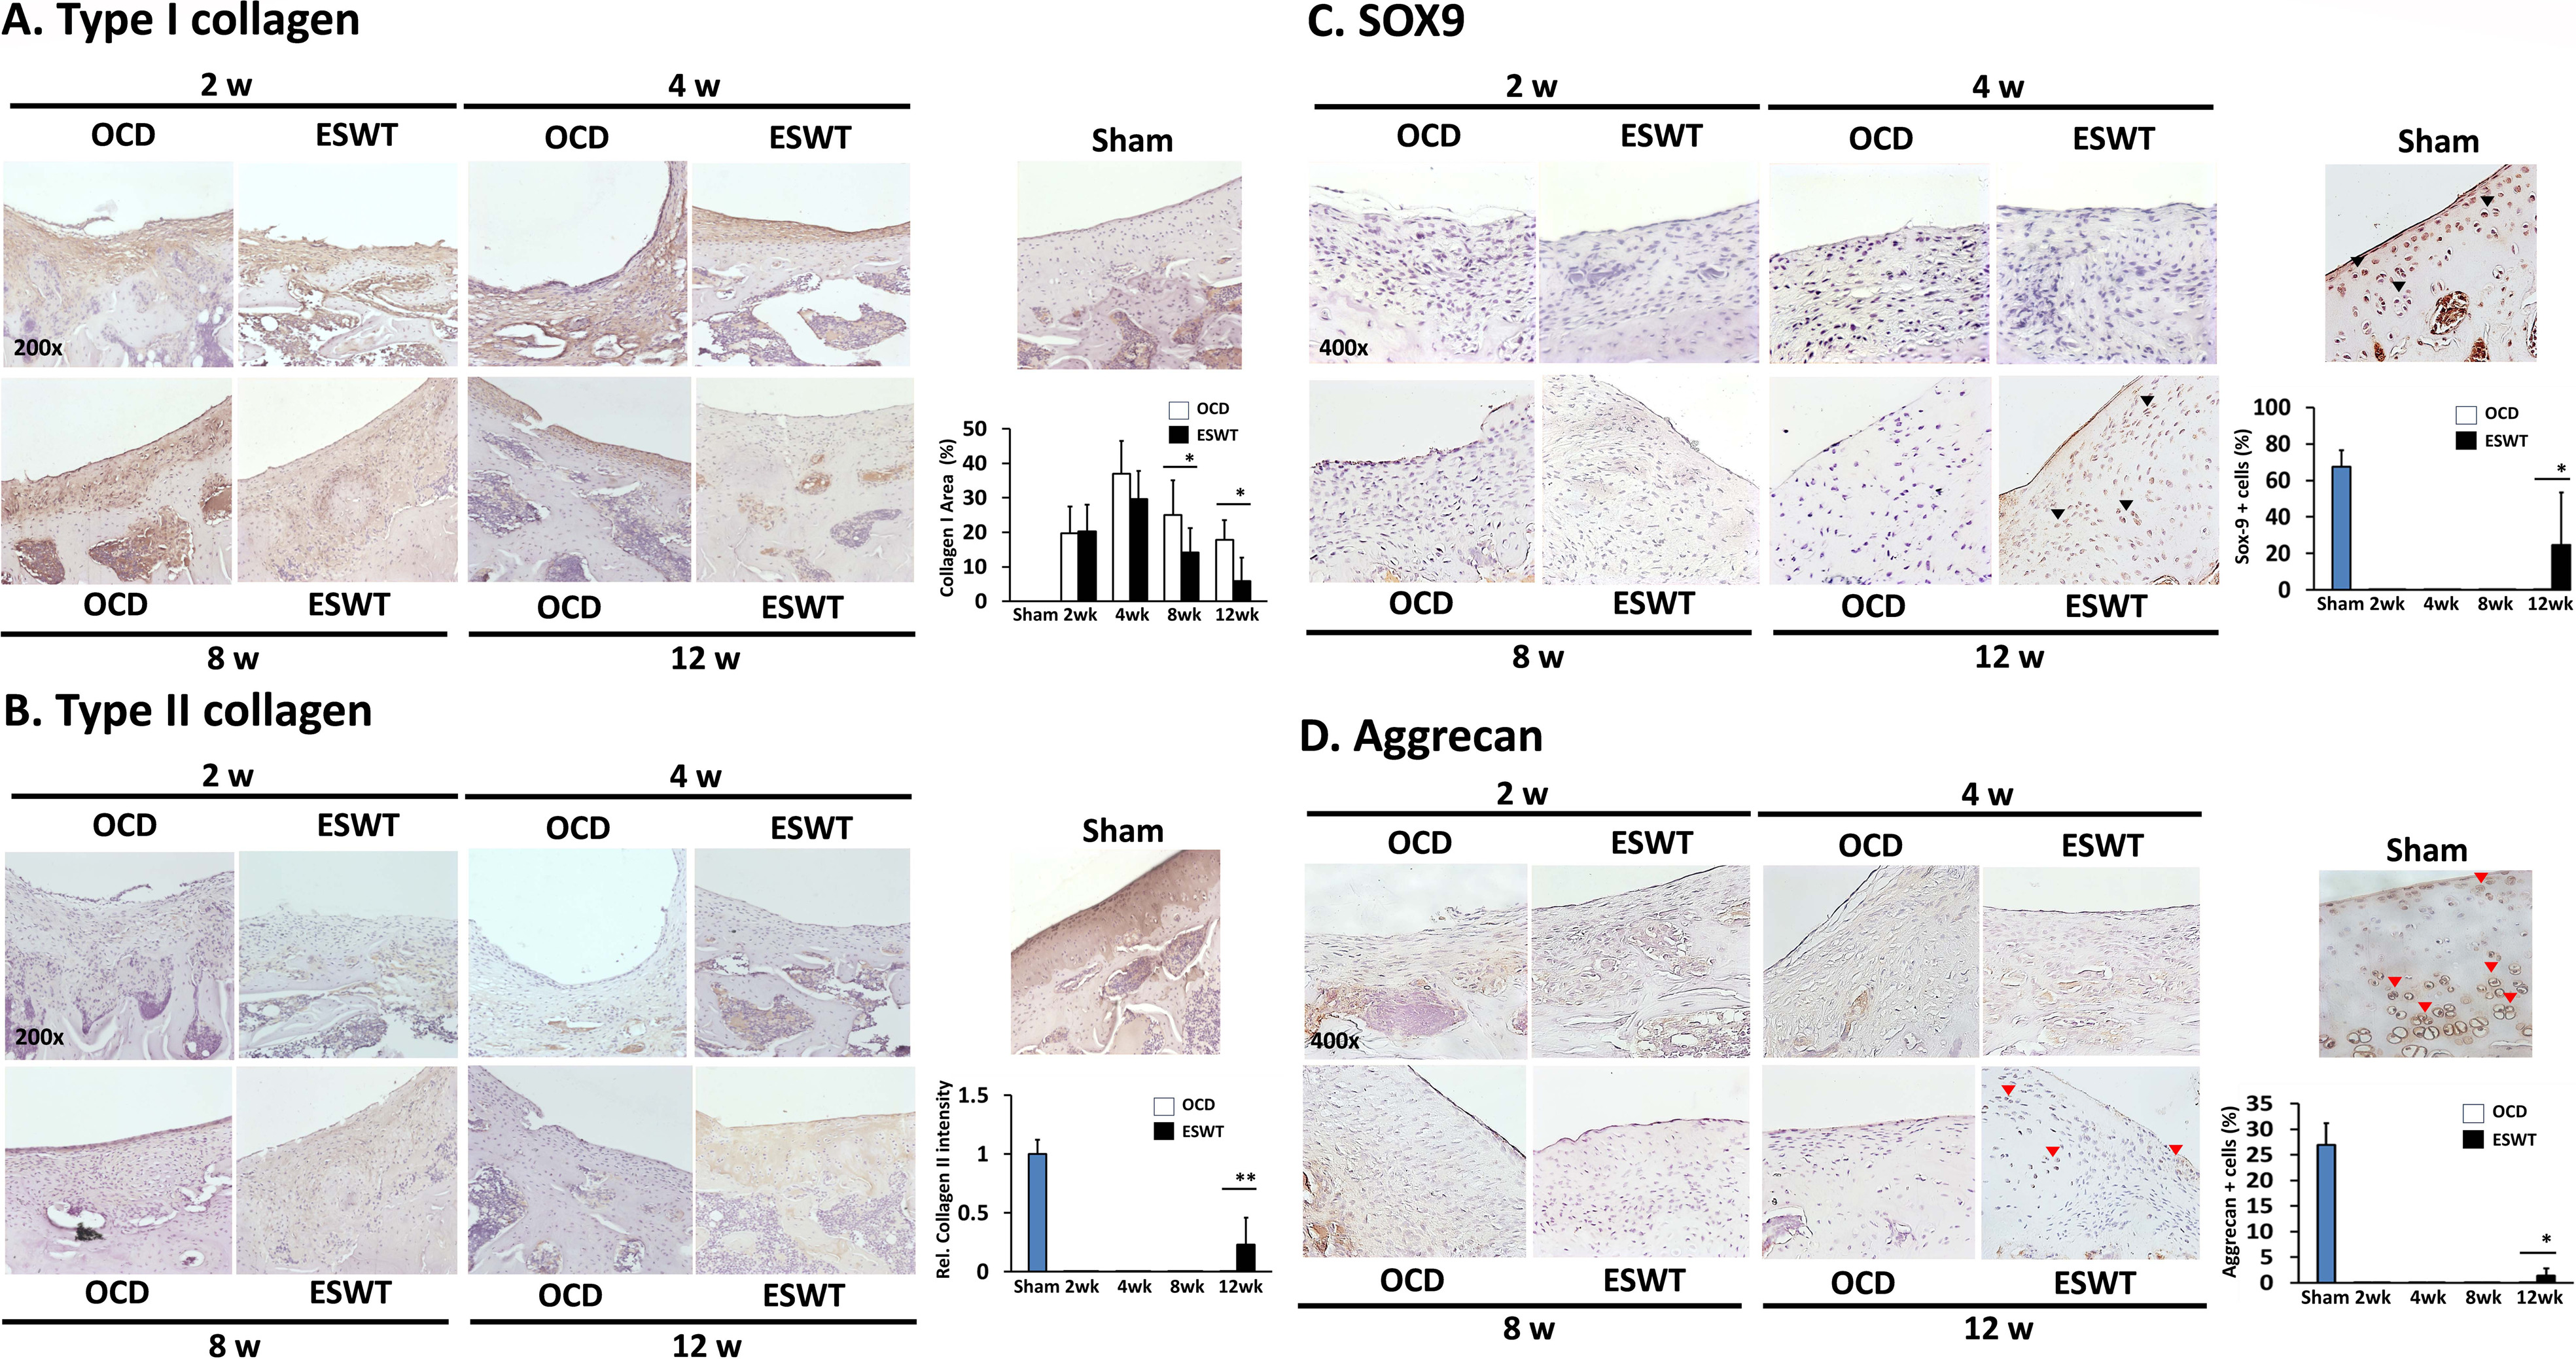 Fig. 2 
            The immunohistochemical (IHC) images and expression levels of type I collagen, type II collagen, SRY-box transcription factor 9 (SOX9), and aggrecan. a) type I collagen (×200 magnification), b) type II collagen (×200 magnification), c) SOX9 (×400 magnification), and d) aggrecan (×400 magnification) as well as the expression levels at two, four, eight, and 12 weeks. *p < 0.05 and **p < 0.01, comparing osteochondral defect (OCD) and extracorporeal shockwave therapy (ESWT) groups.
          